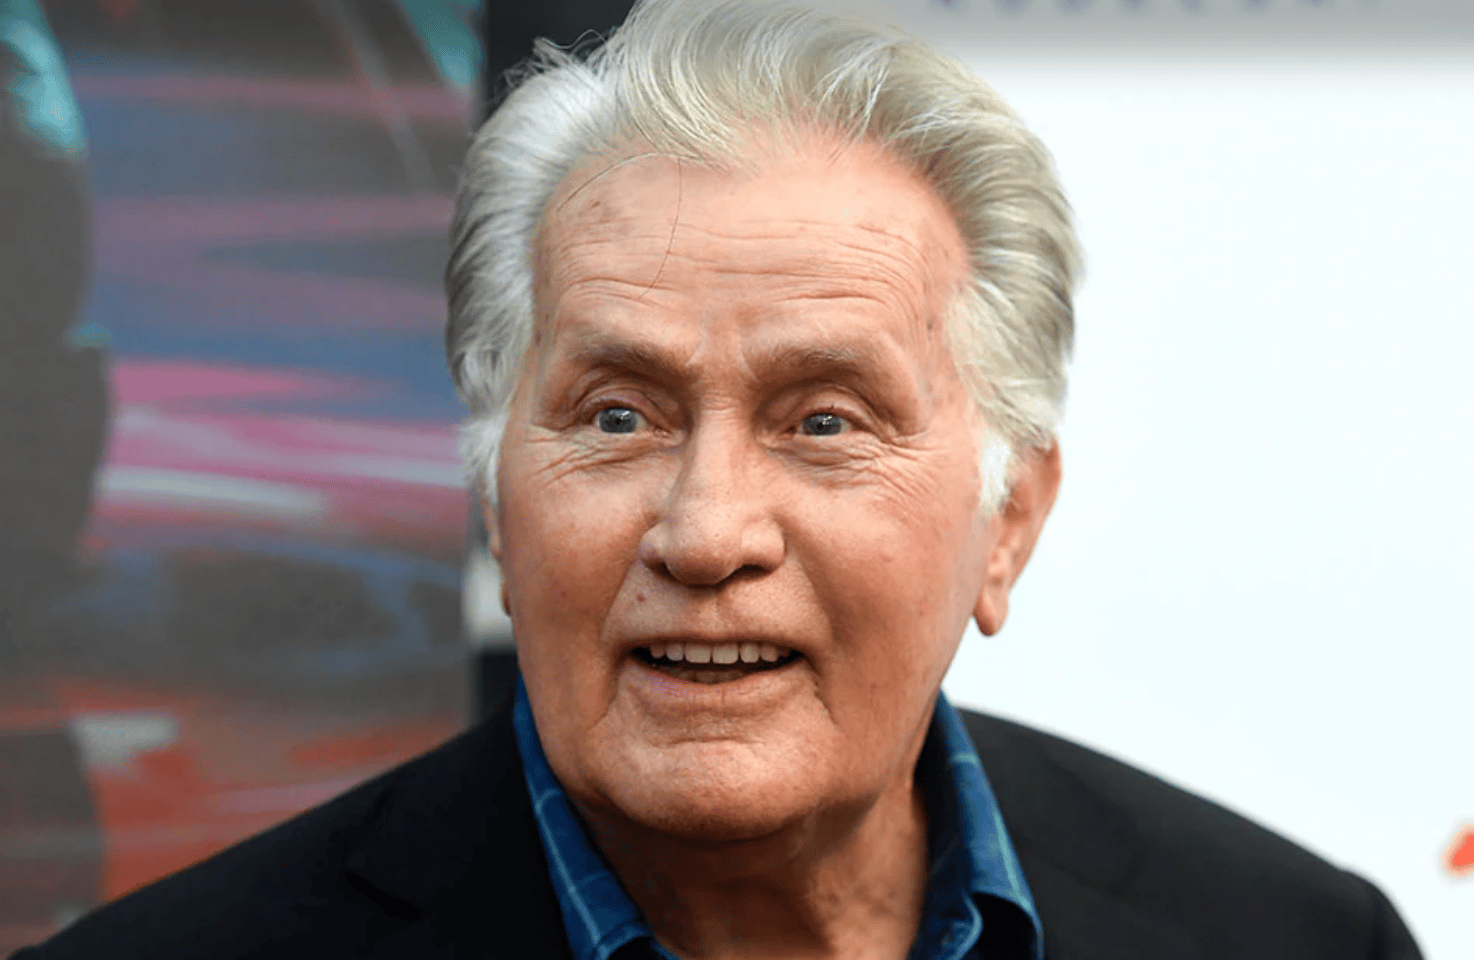 Martin Sheen Says He Wishes He’d Used His Real Name as an Actor